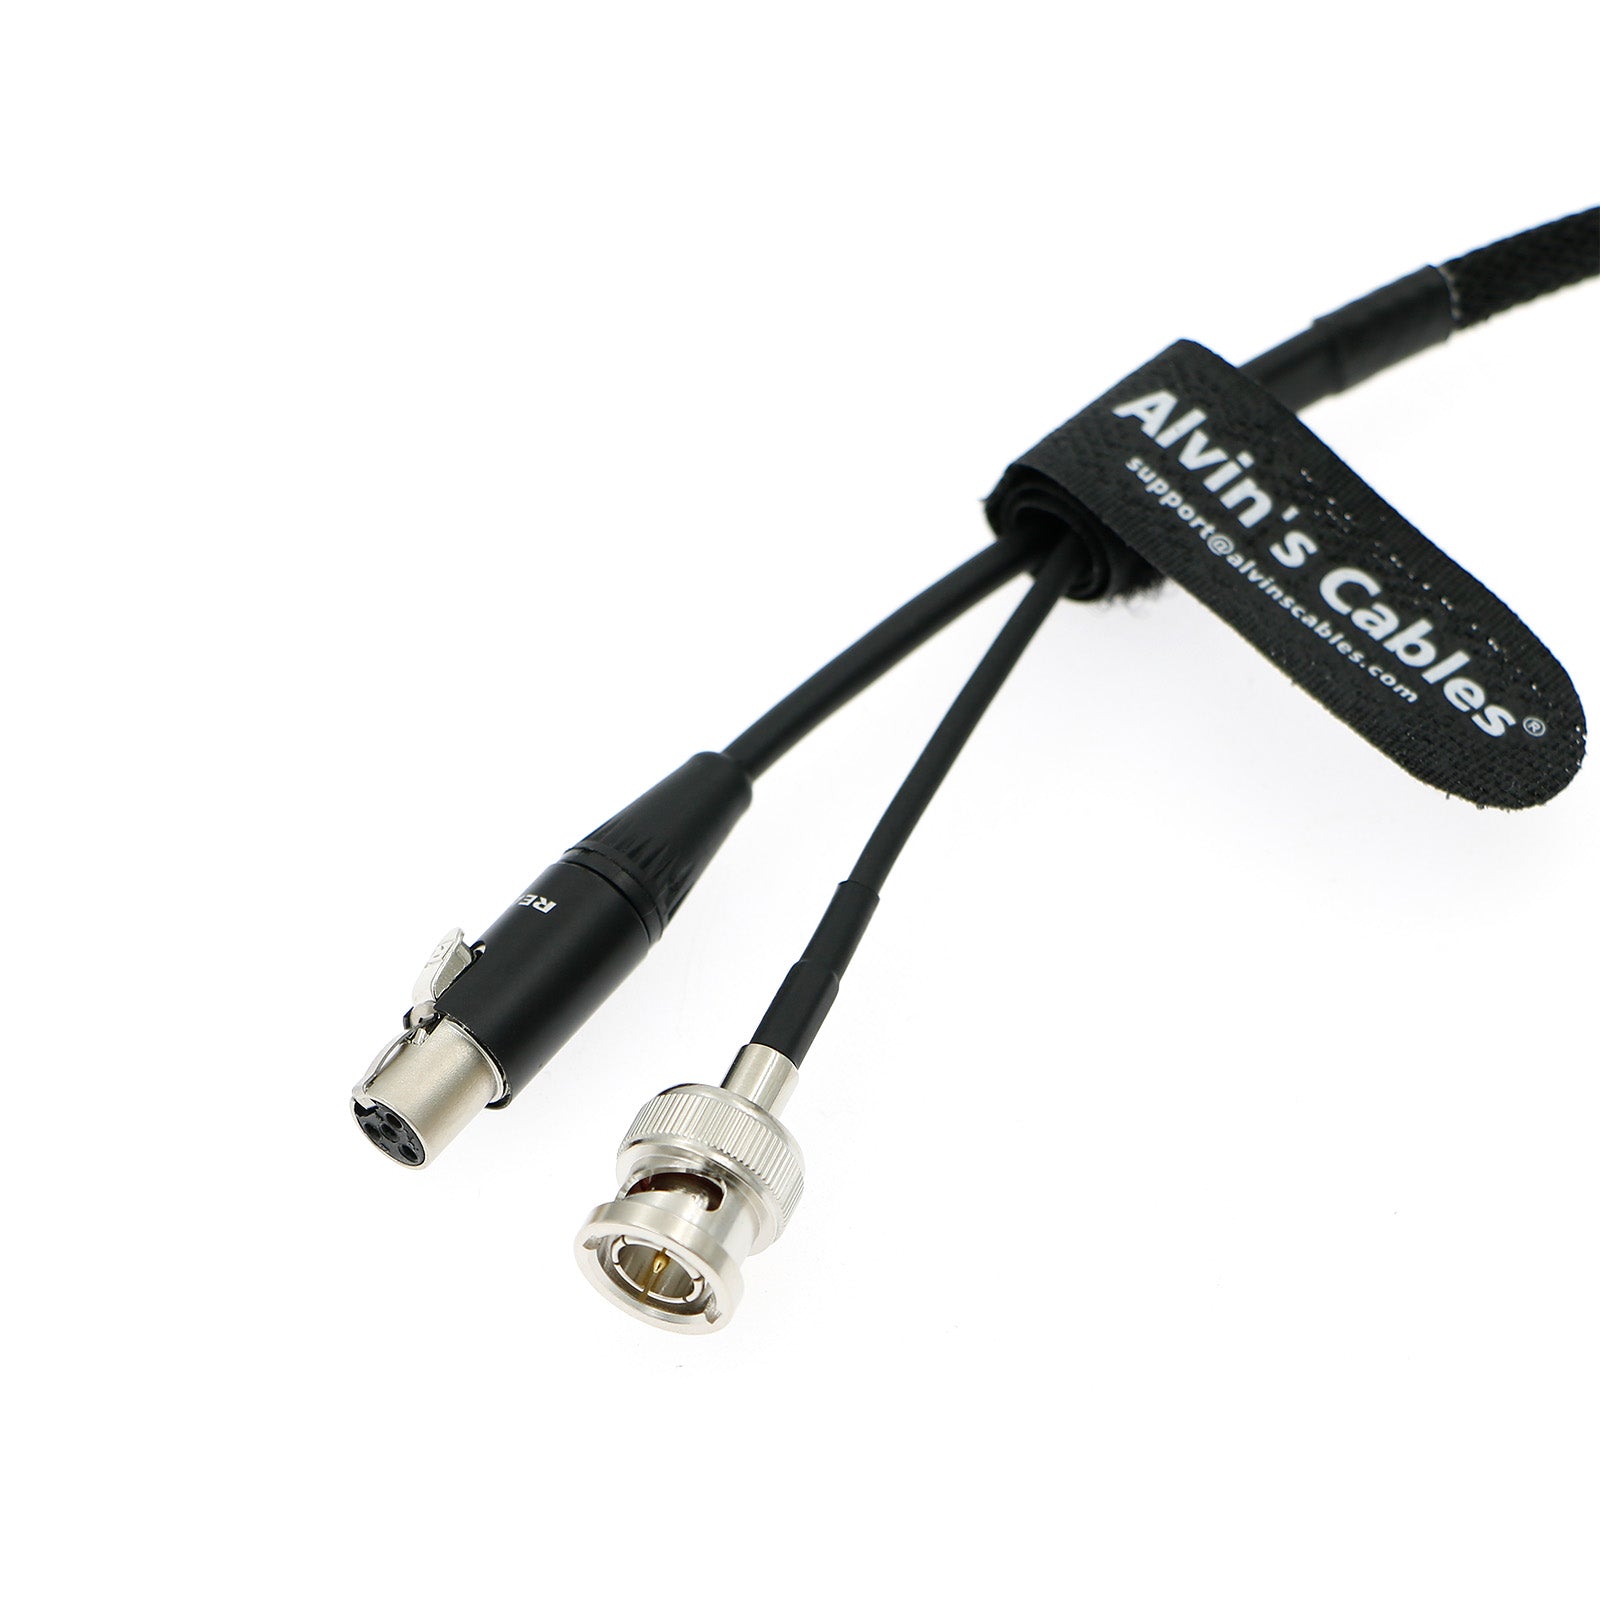 Alvin's Cables TV Logic Monitor Combination Power Cable Mini 4 pin XLR to D-Tap & BNC to BNC 75 Ohm SDI Video Coaxial Cable for F-5A F-10A F-7HS Monitor 60CM